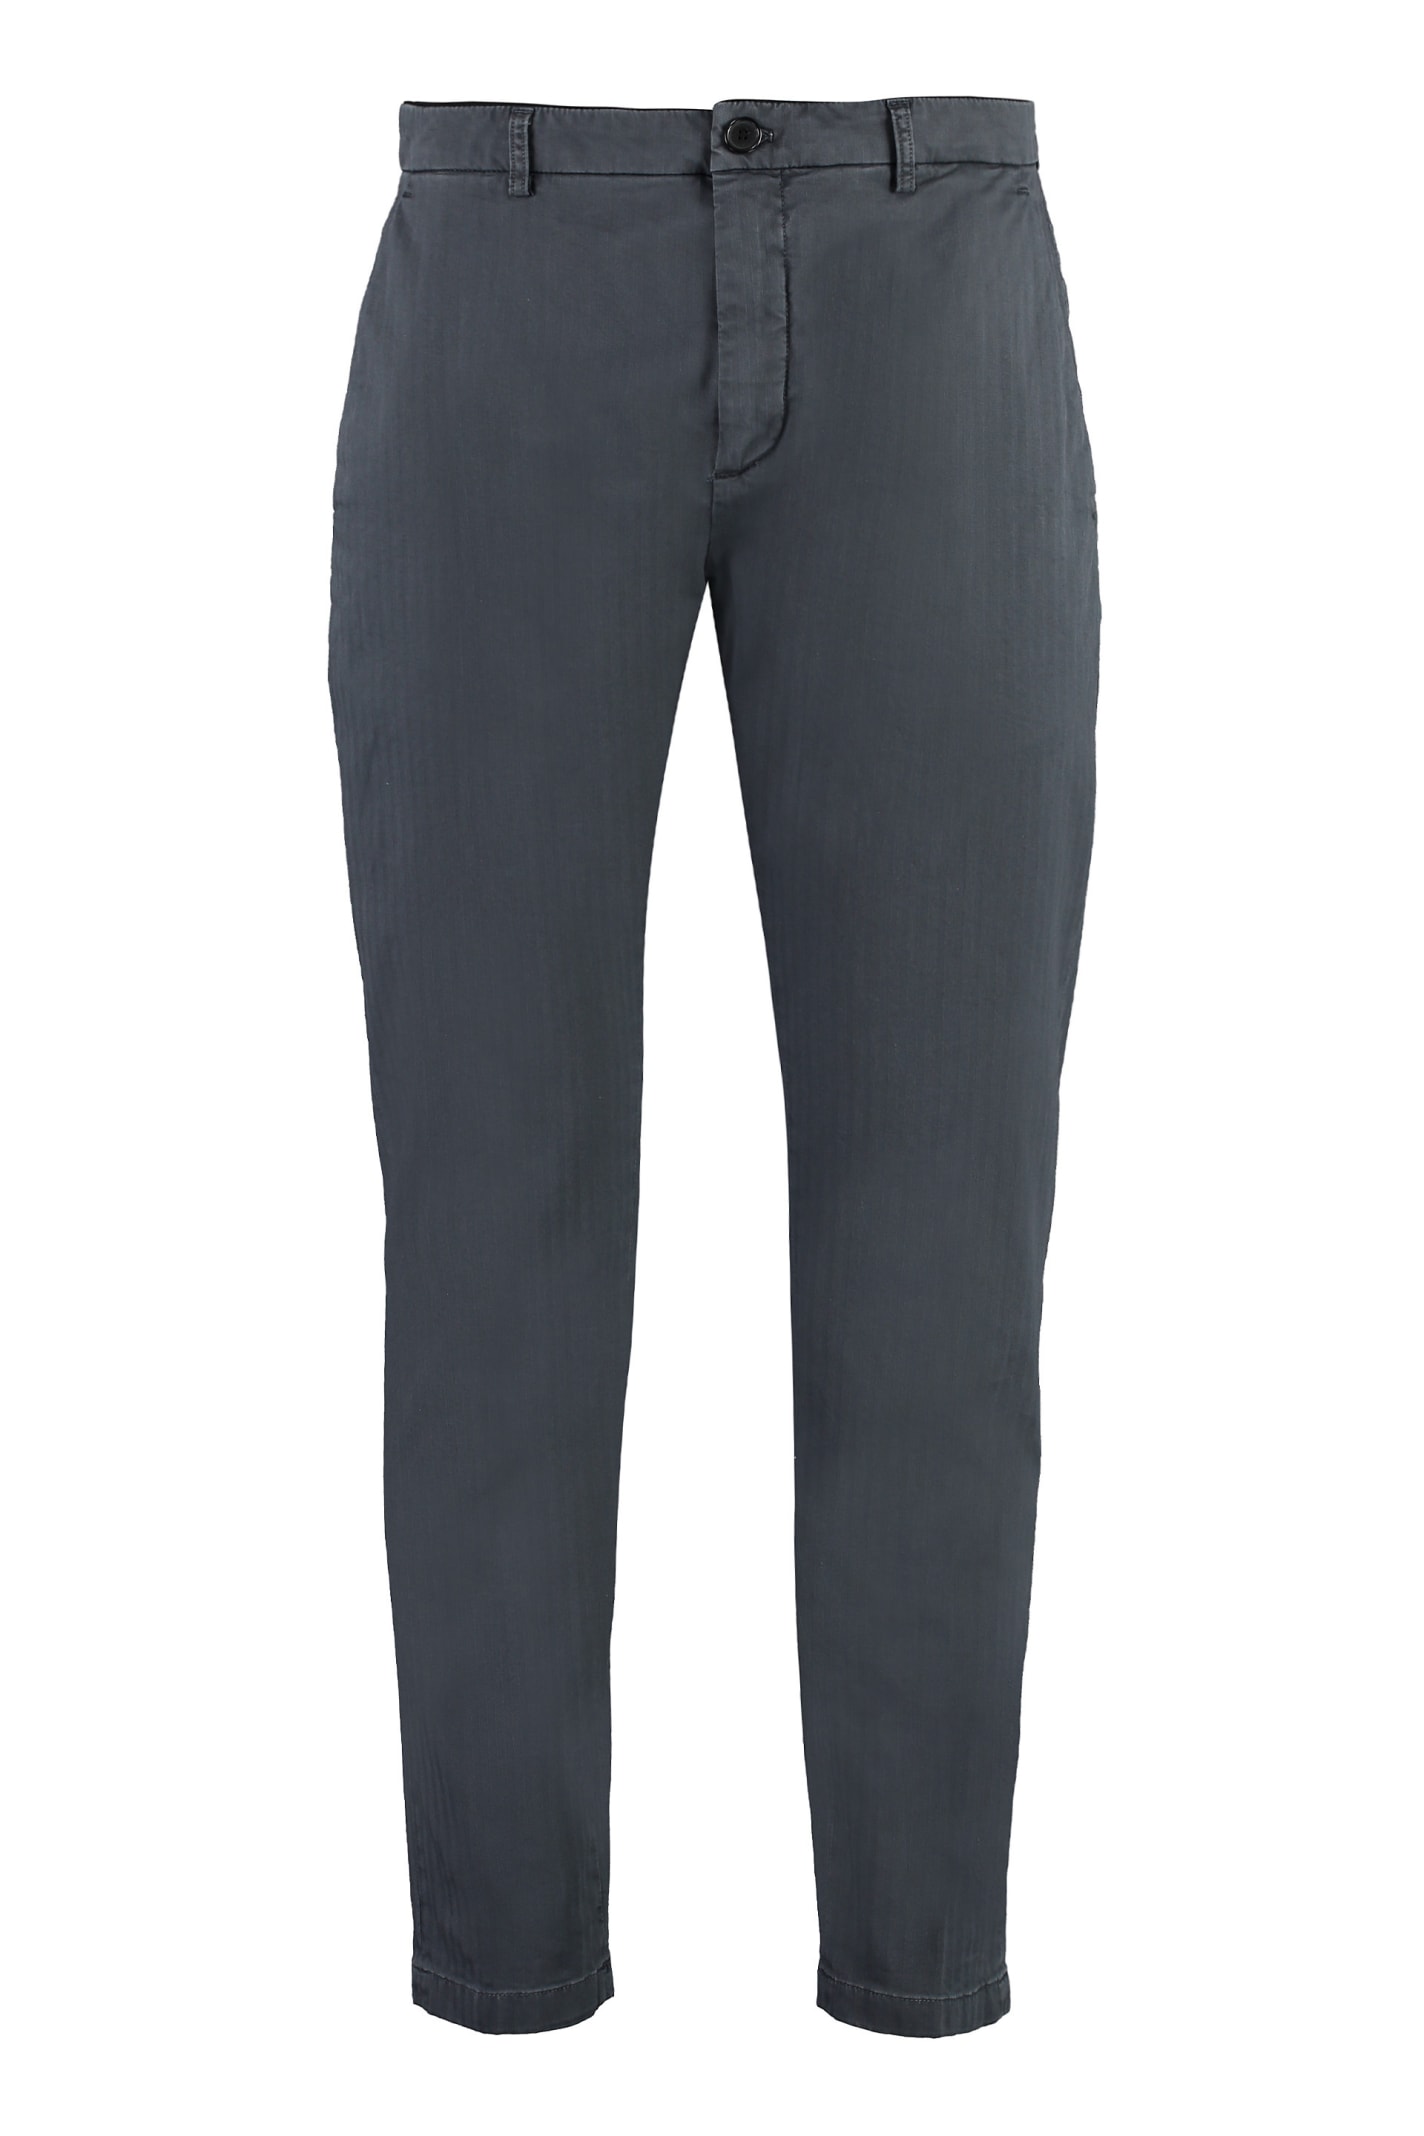 Department Five Prince Chino Pants In Grey